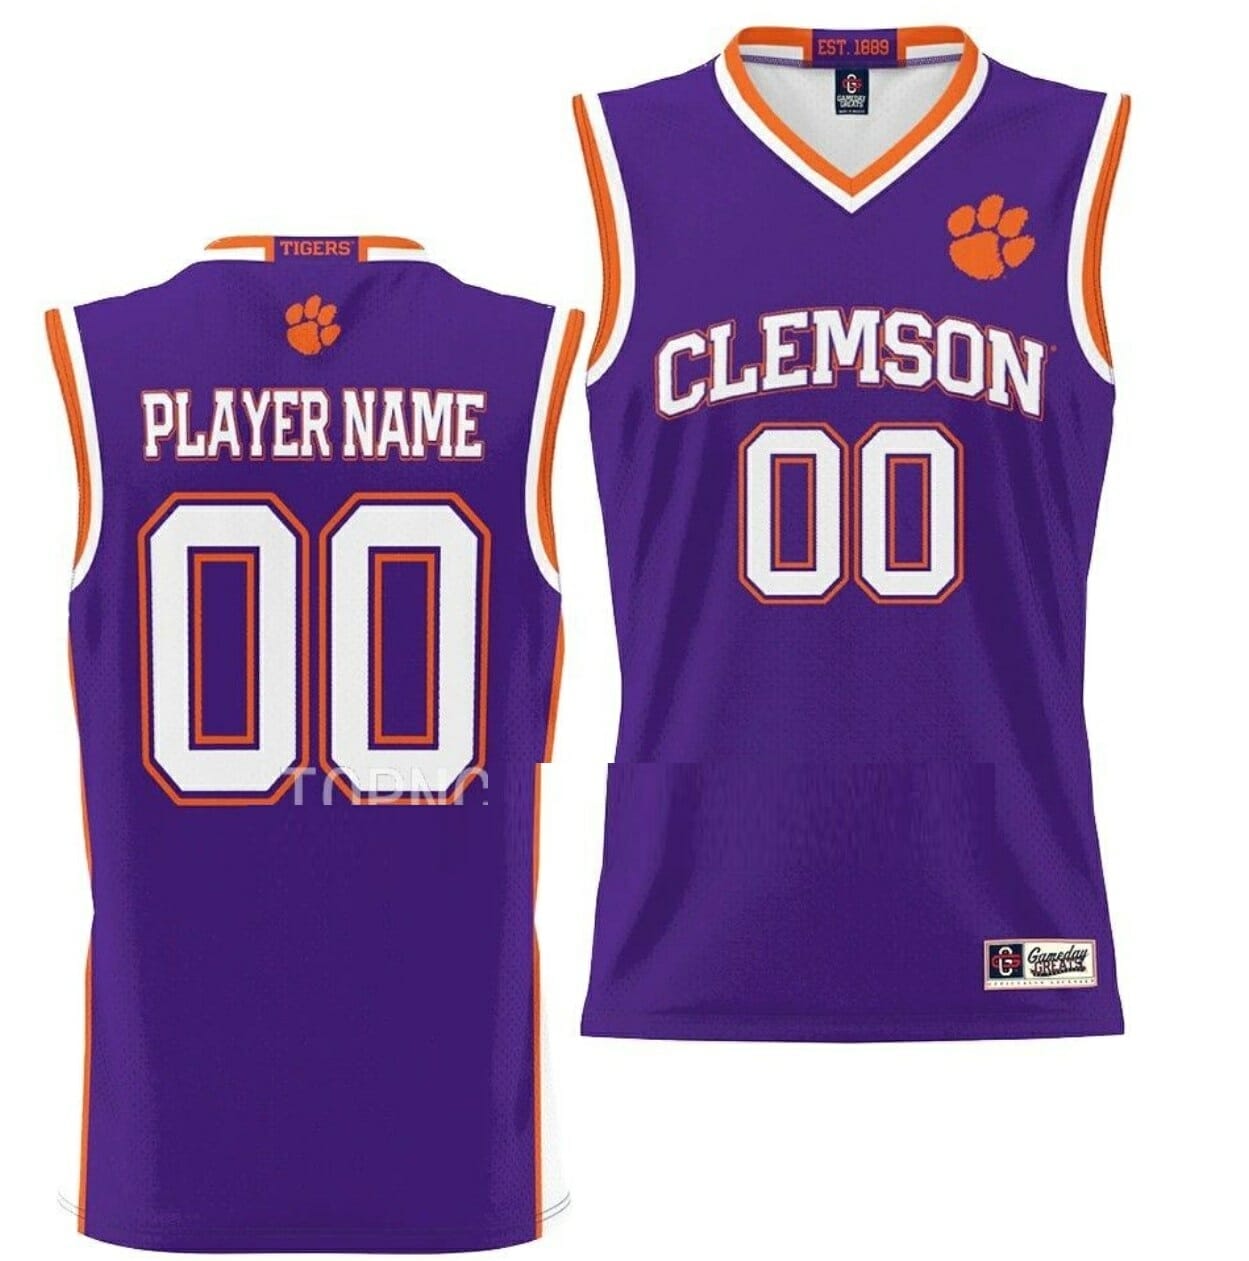 Clemson Tigers Jersey - Your Home for Clemson Jersey